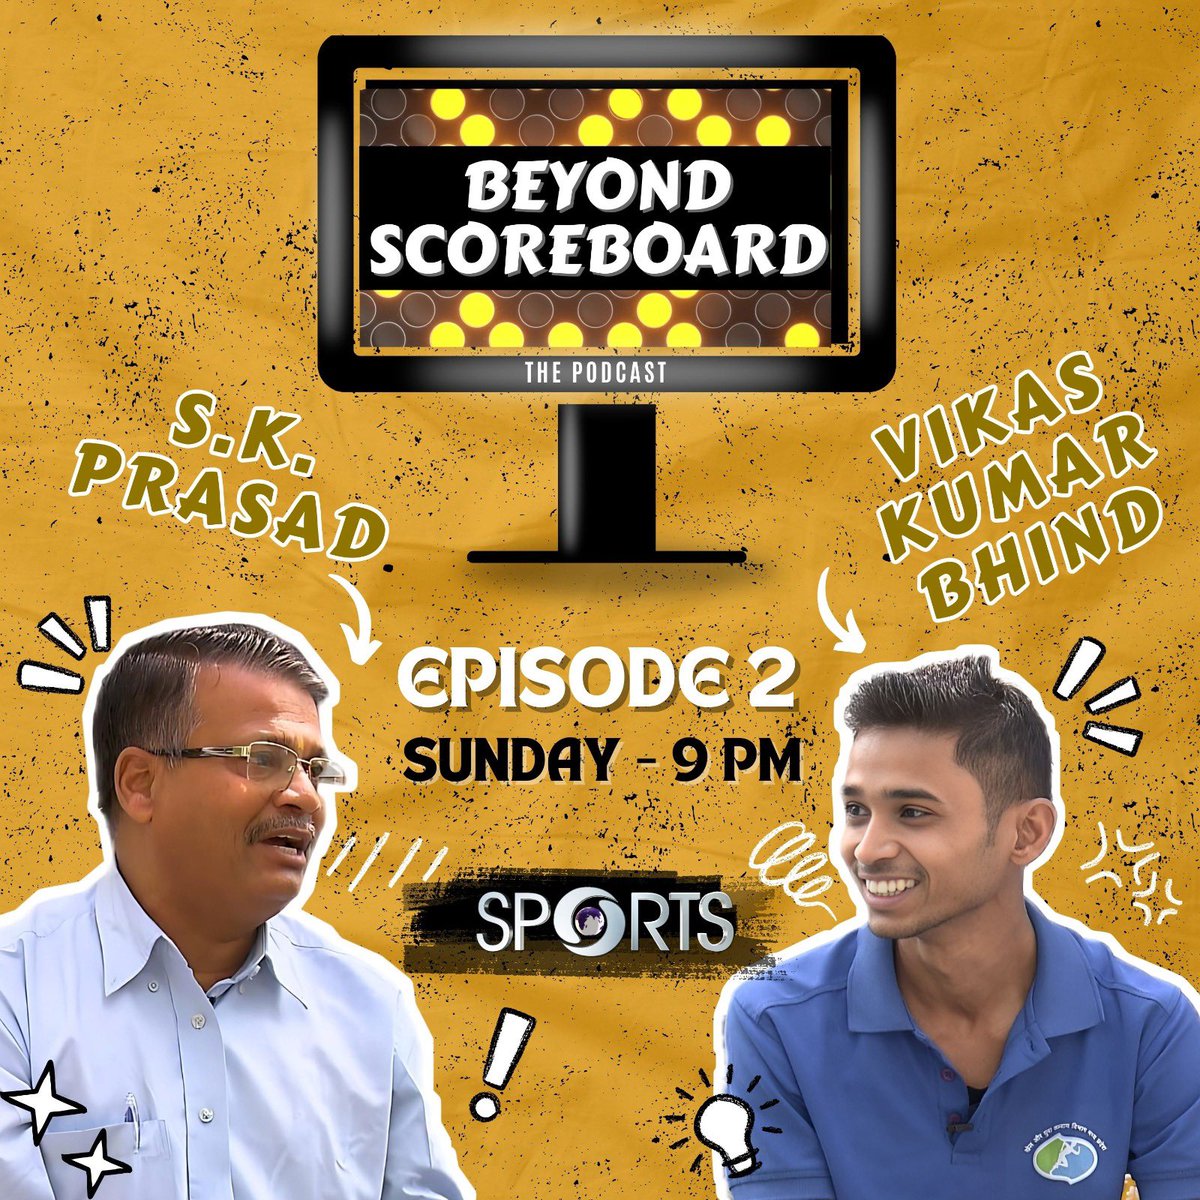 Vikas Bind was finding it difficult to pace himself in races. Bind asked his coach to give him some time and the rest as they say is history. 🏃 New Episode premieres today 🎙️ 9pm youtu.be/1HojjlWIyf8?si…